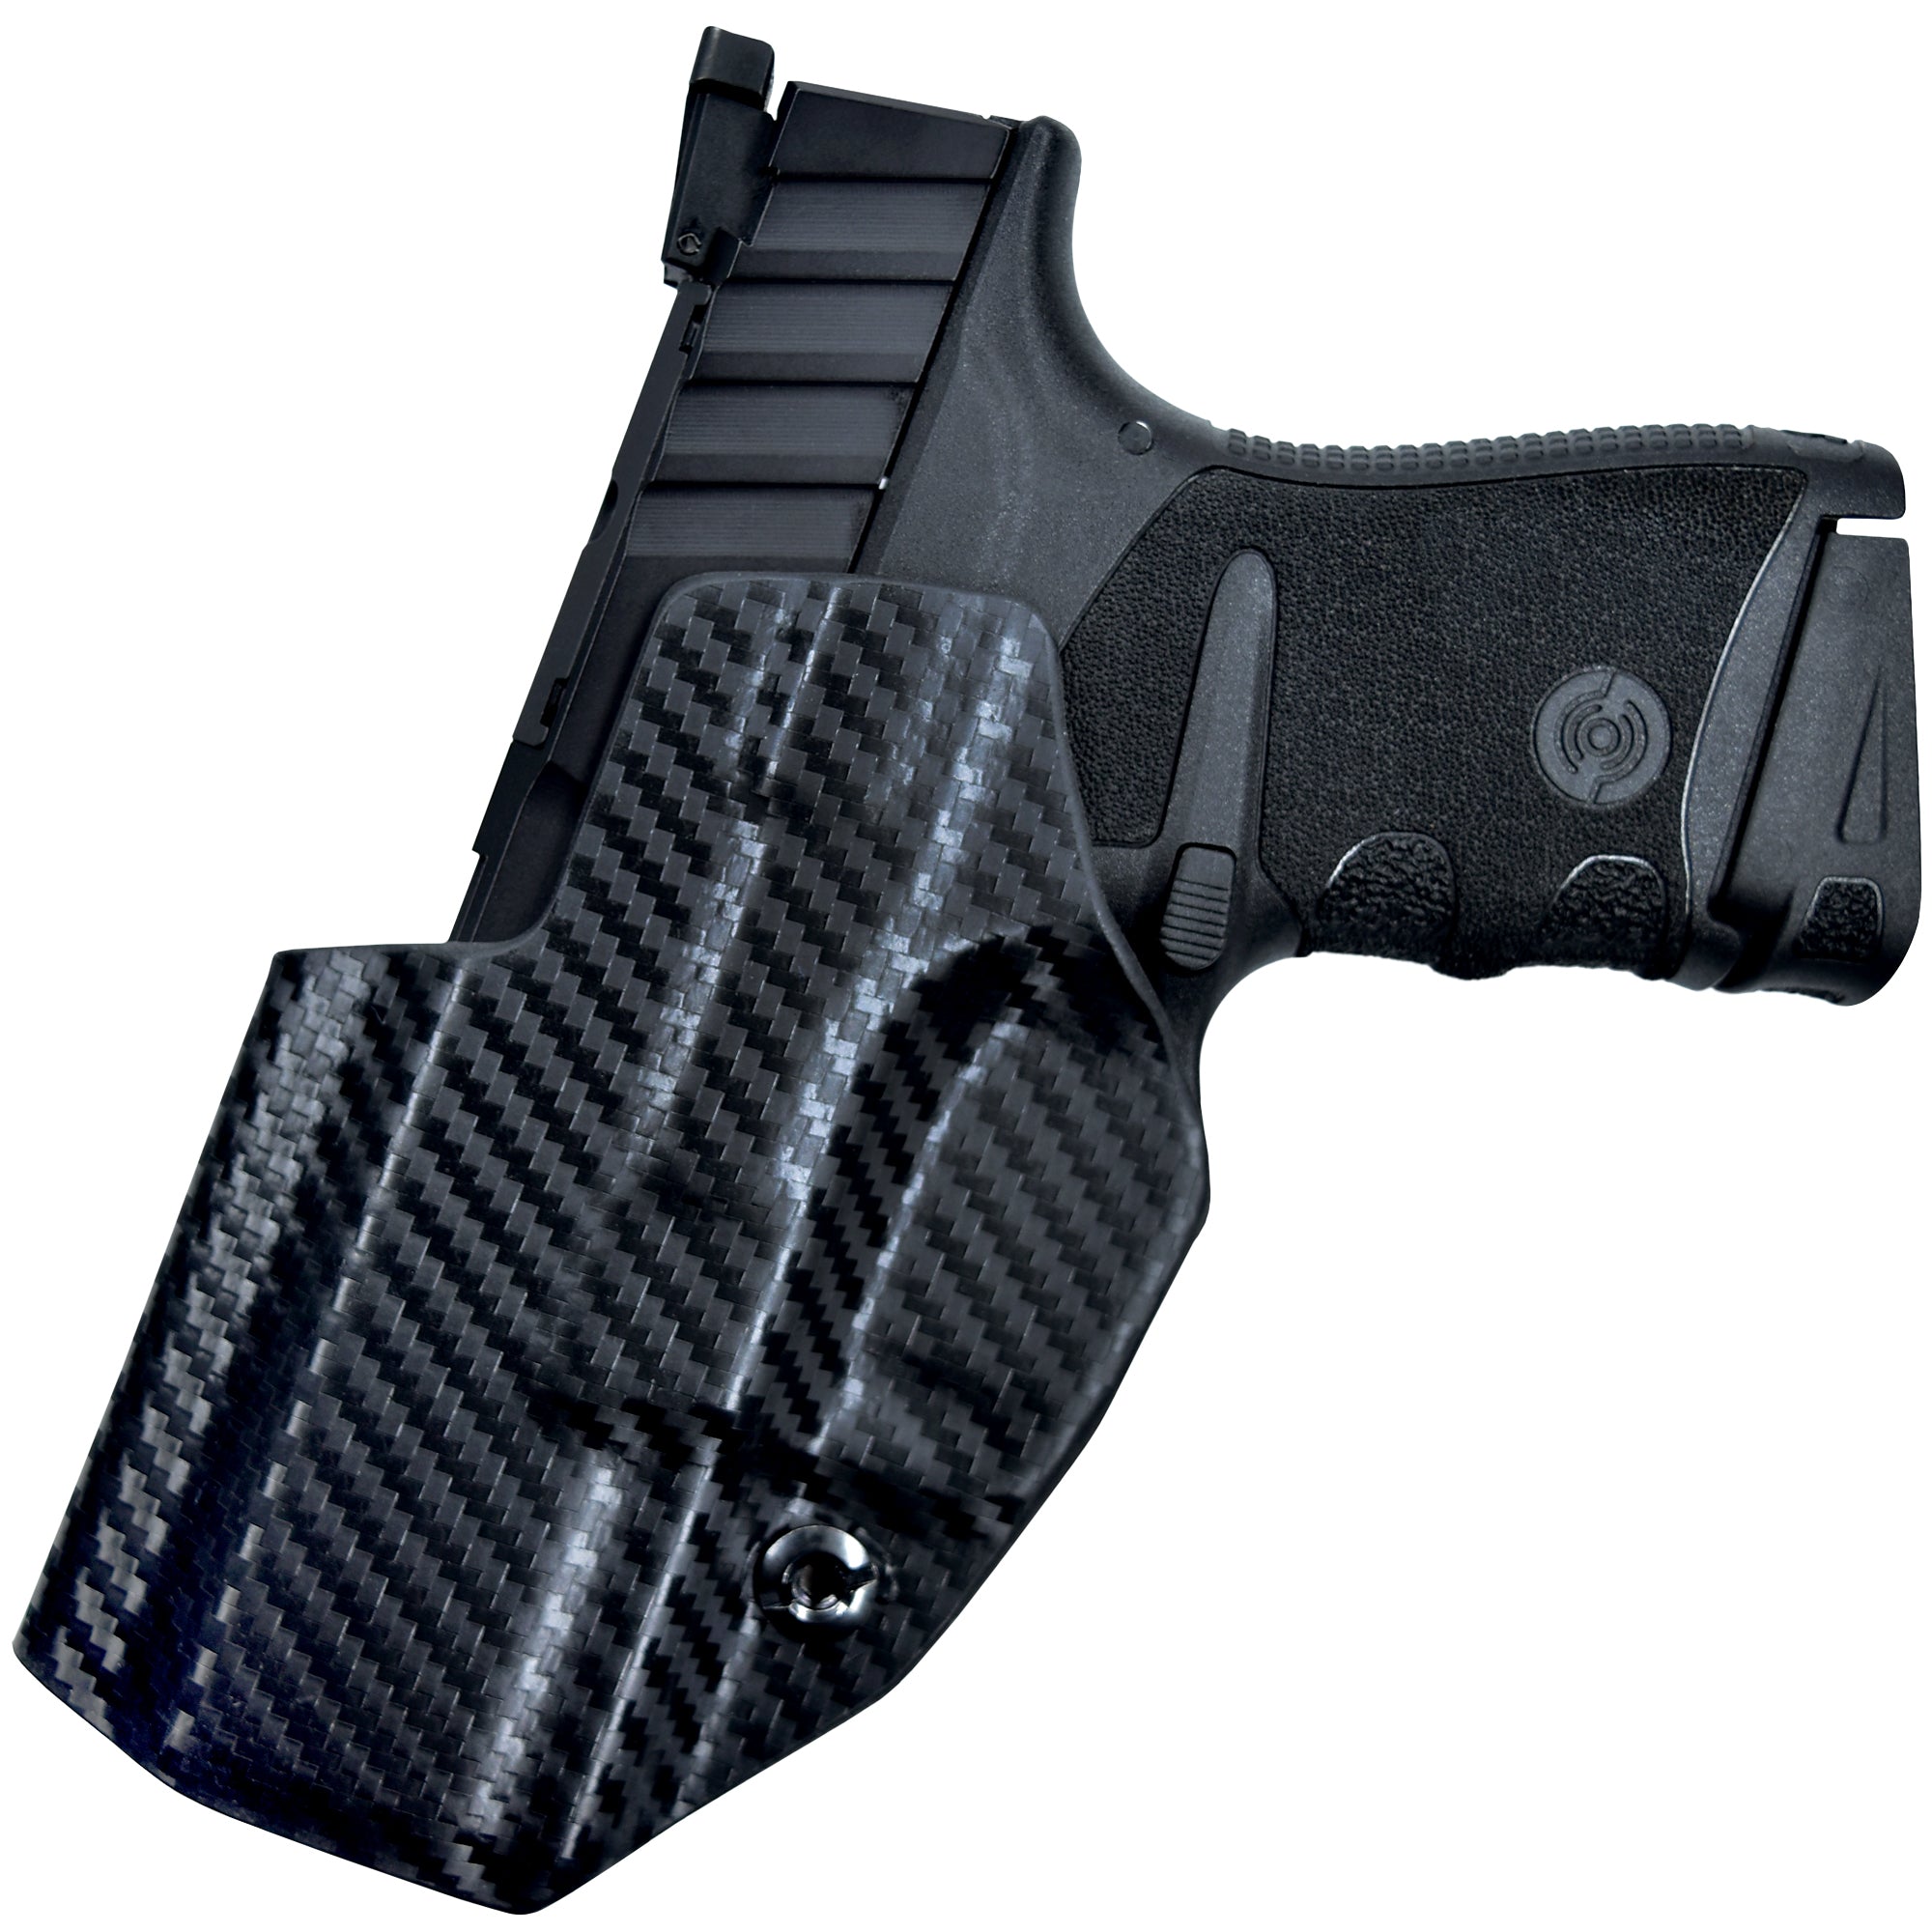 A Universal Holster. The Grip Tuck Is Made To Fit Any Handgun.